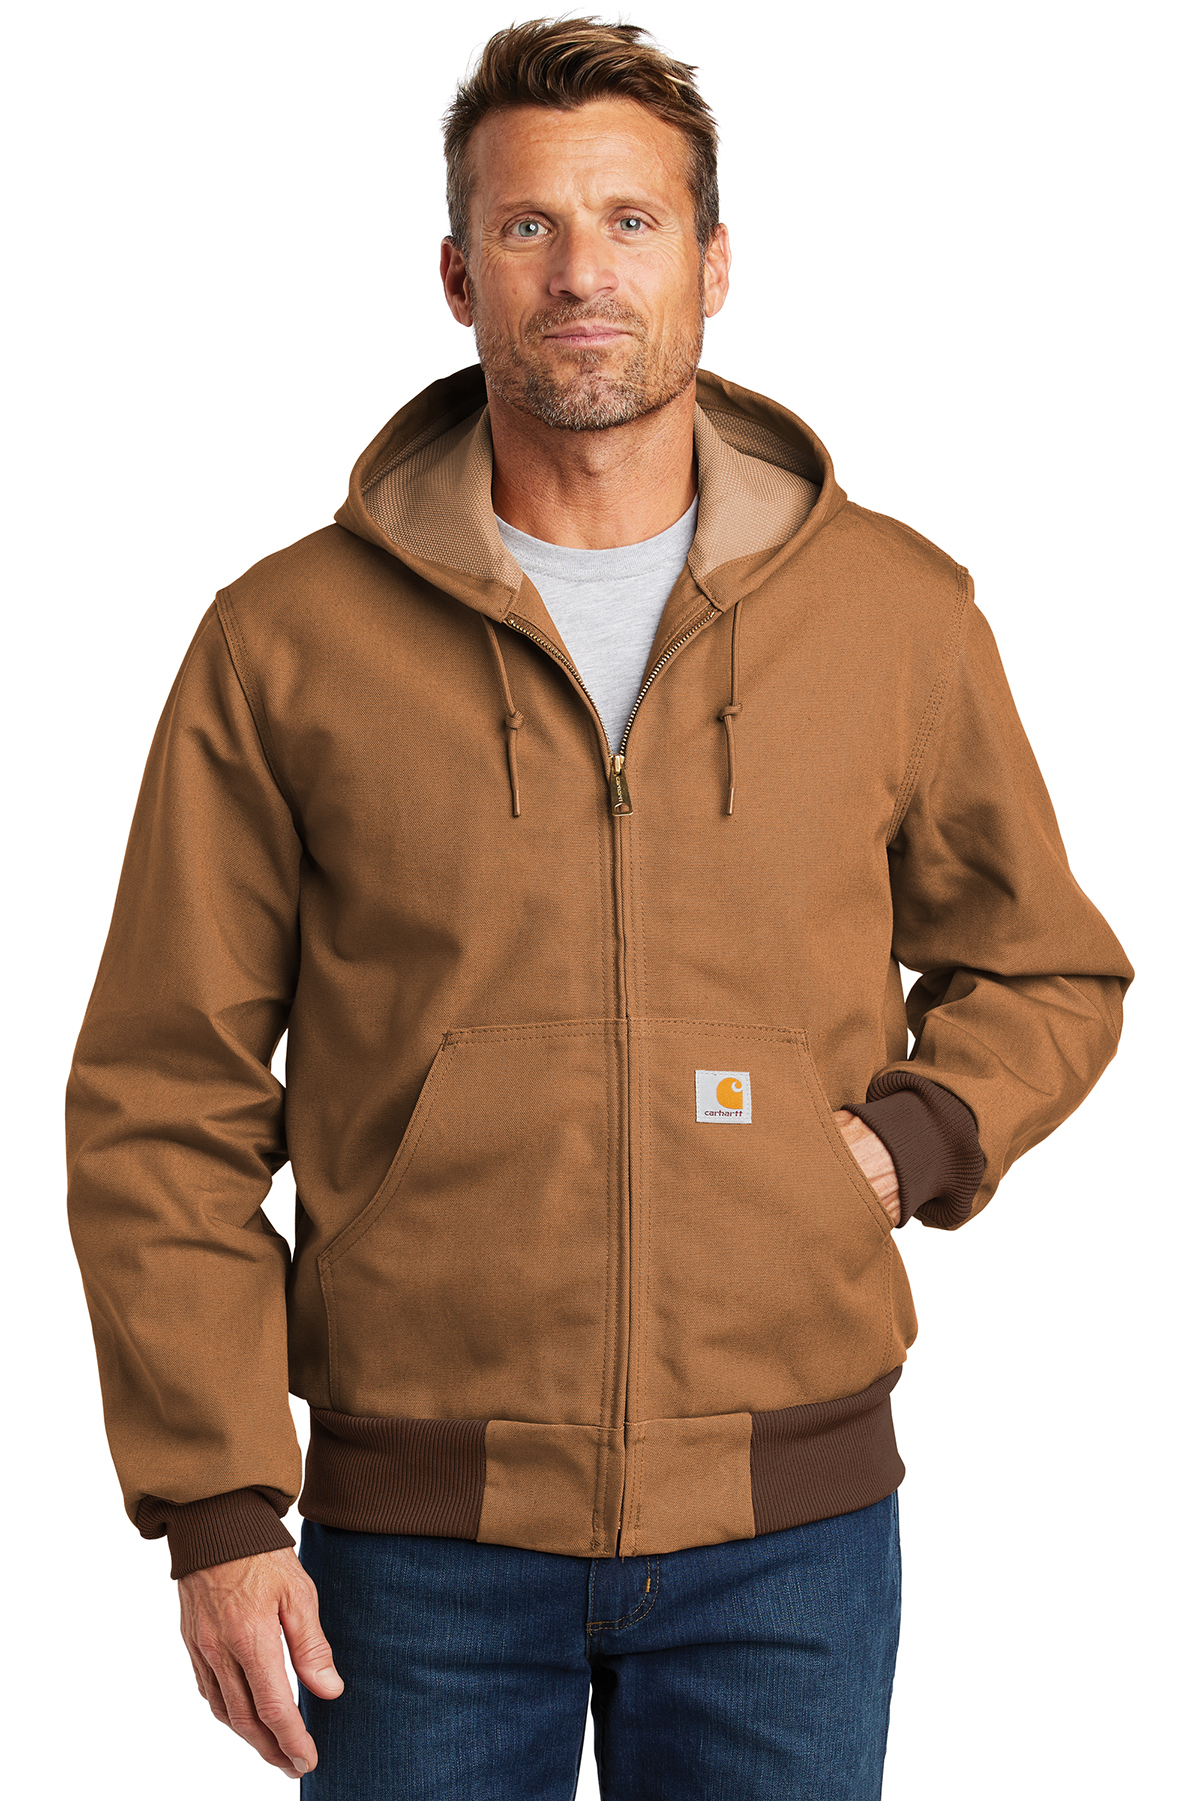 CTTJ131  Carhartt ® Tall Thermal-Lined Duck Active Jac